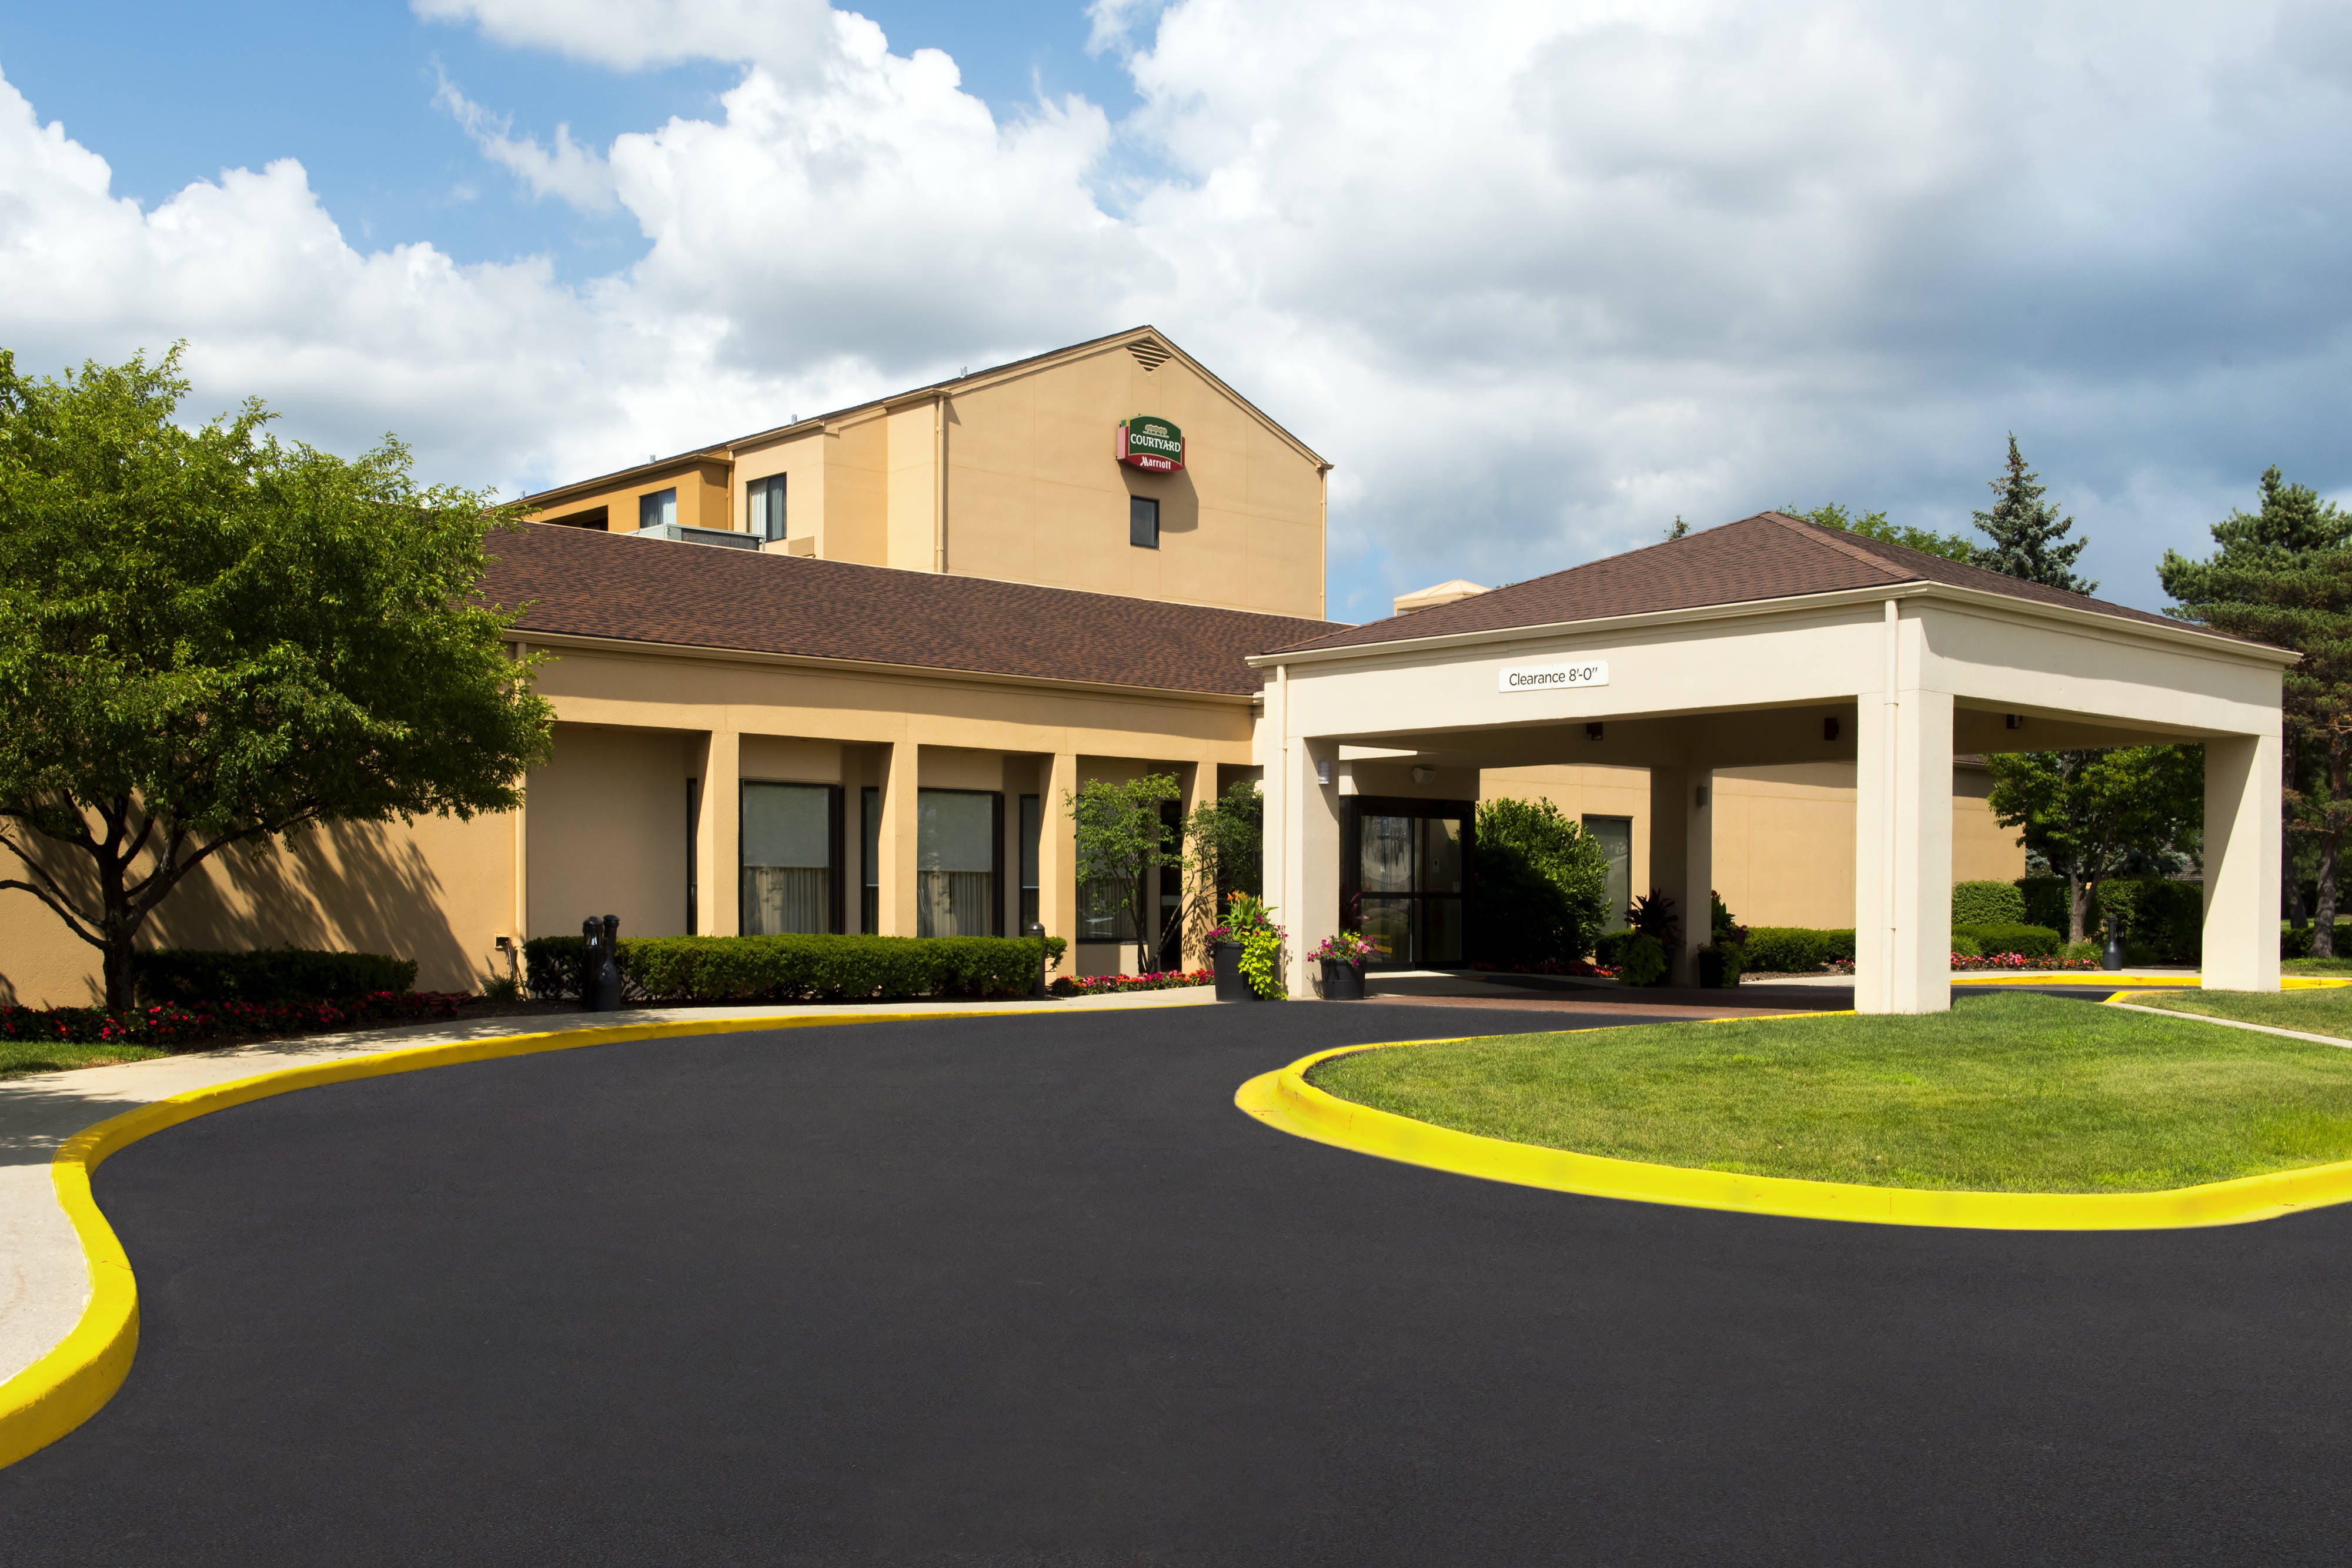 Photo of Courtyard by Marriott Chicago Arlington Heights/North, Arlington Heights, IL